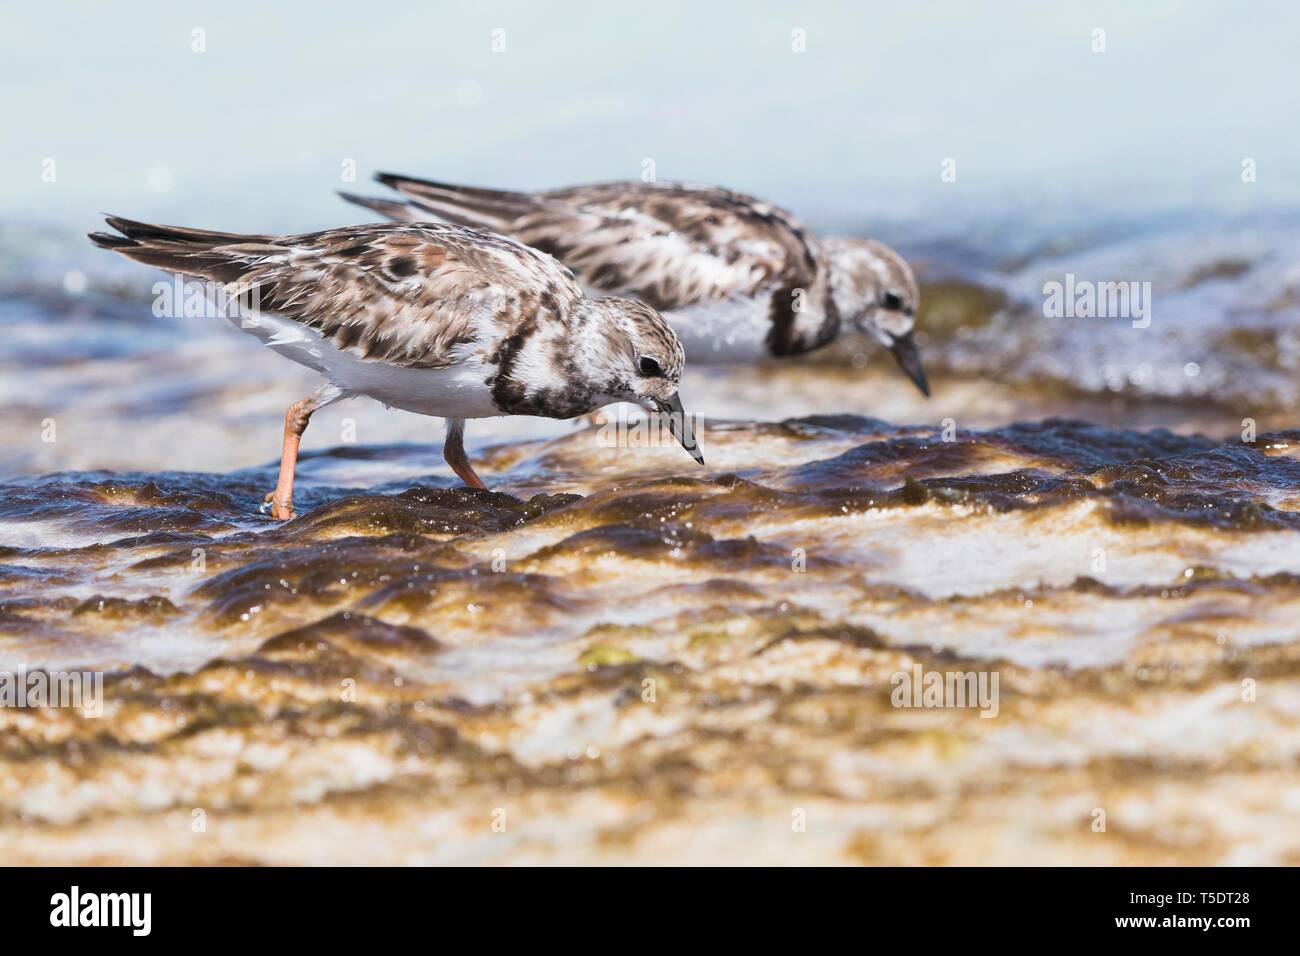 Two Ruddy turnstones (Arenaria interpres) searching for food in shallow water, Cayo Santa Maria, Cuba Stock Photo